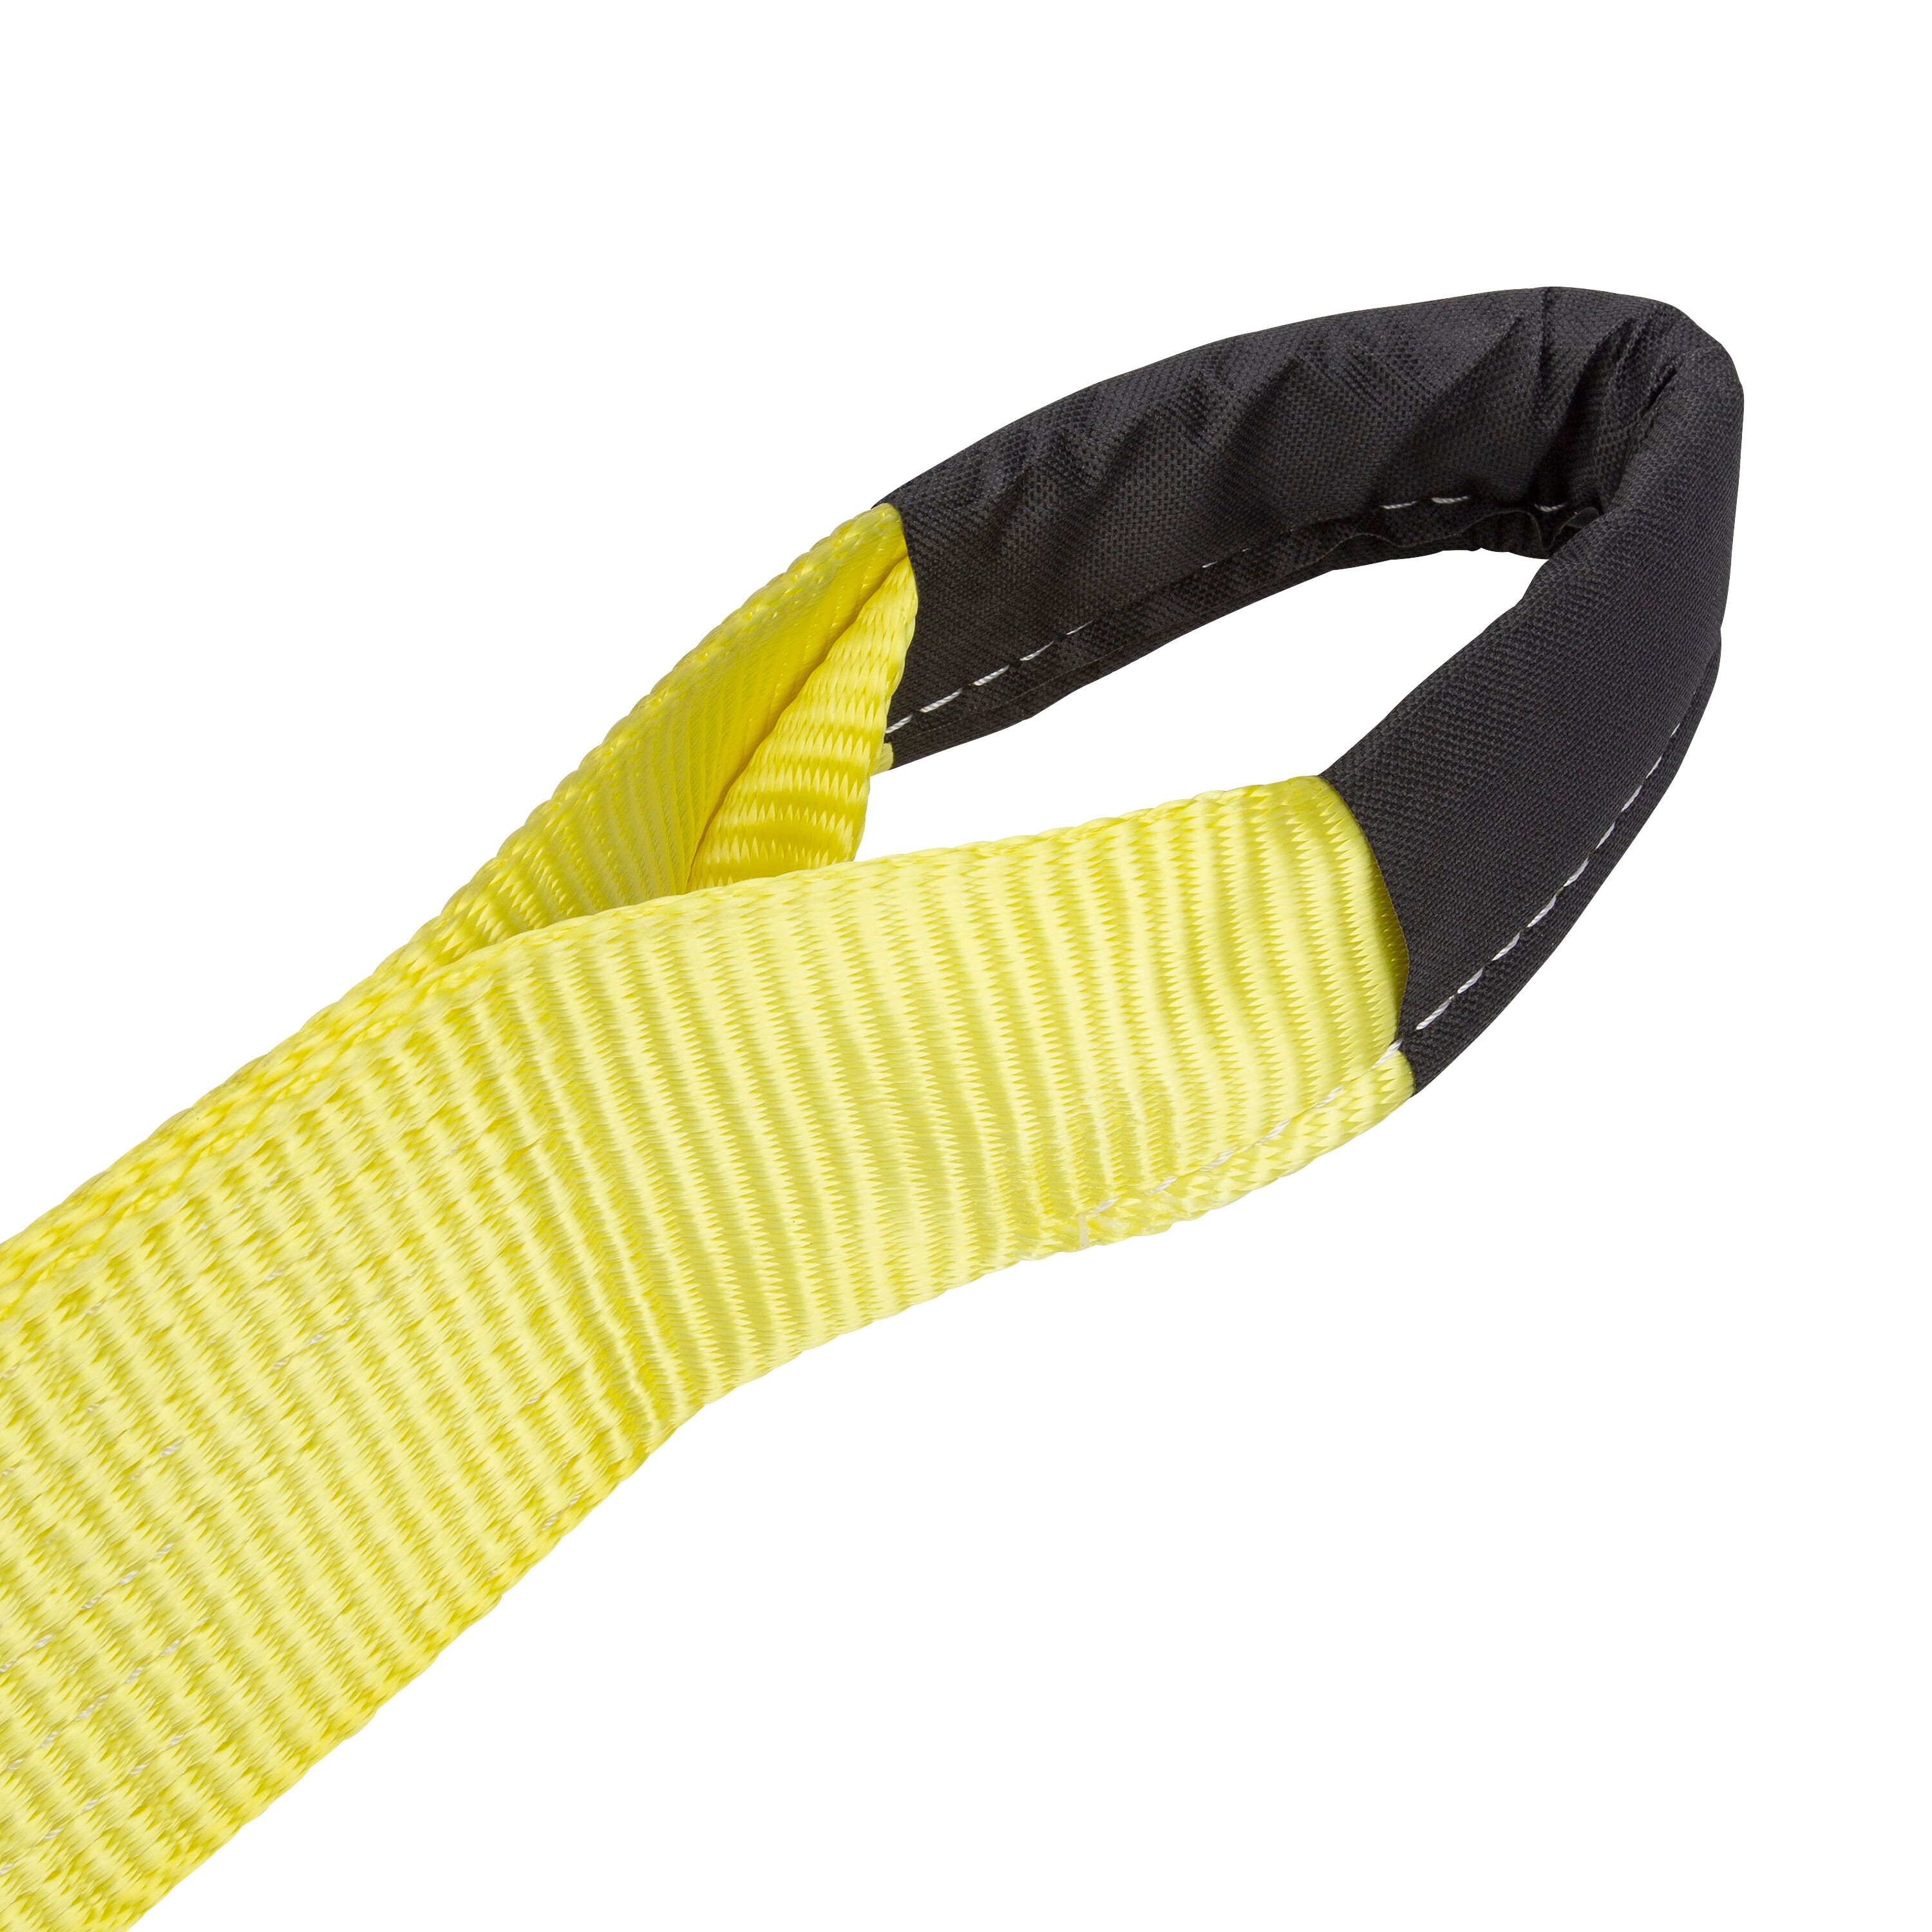 Smart Straps 322824 Heavy Duty Recovery Tow Strap with Loop Ends - 30 ft. x 3 in., 7500 lbs Working Load - 22 500 lbs Breaking Strength - Yellow